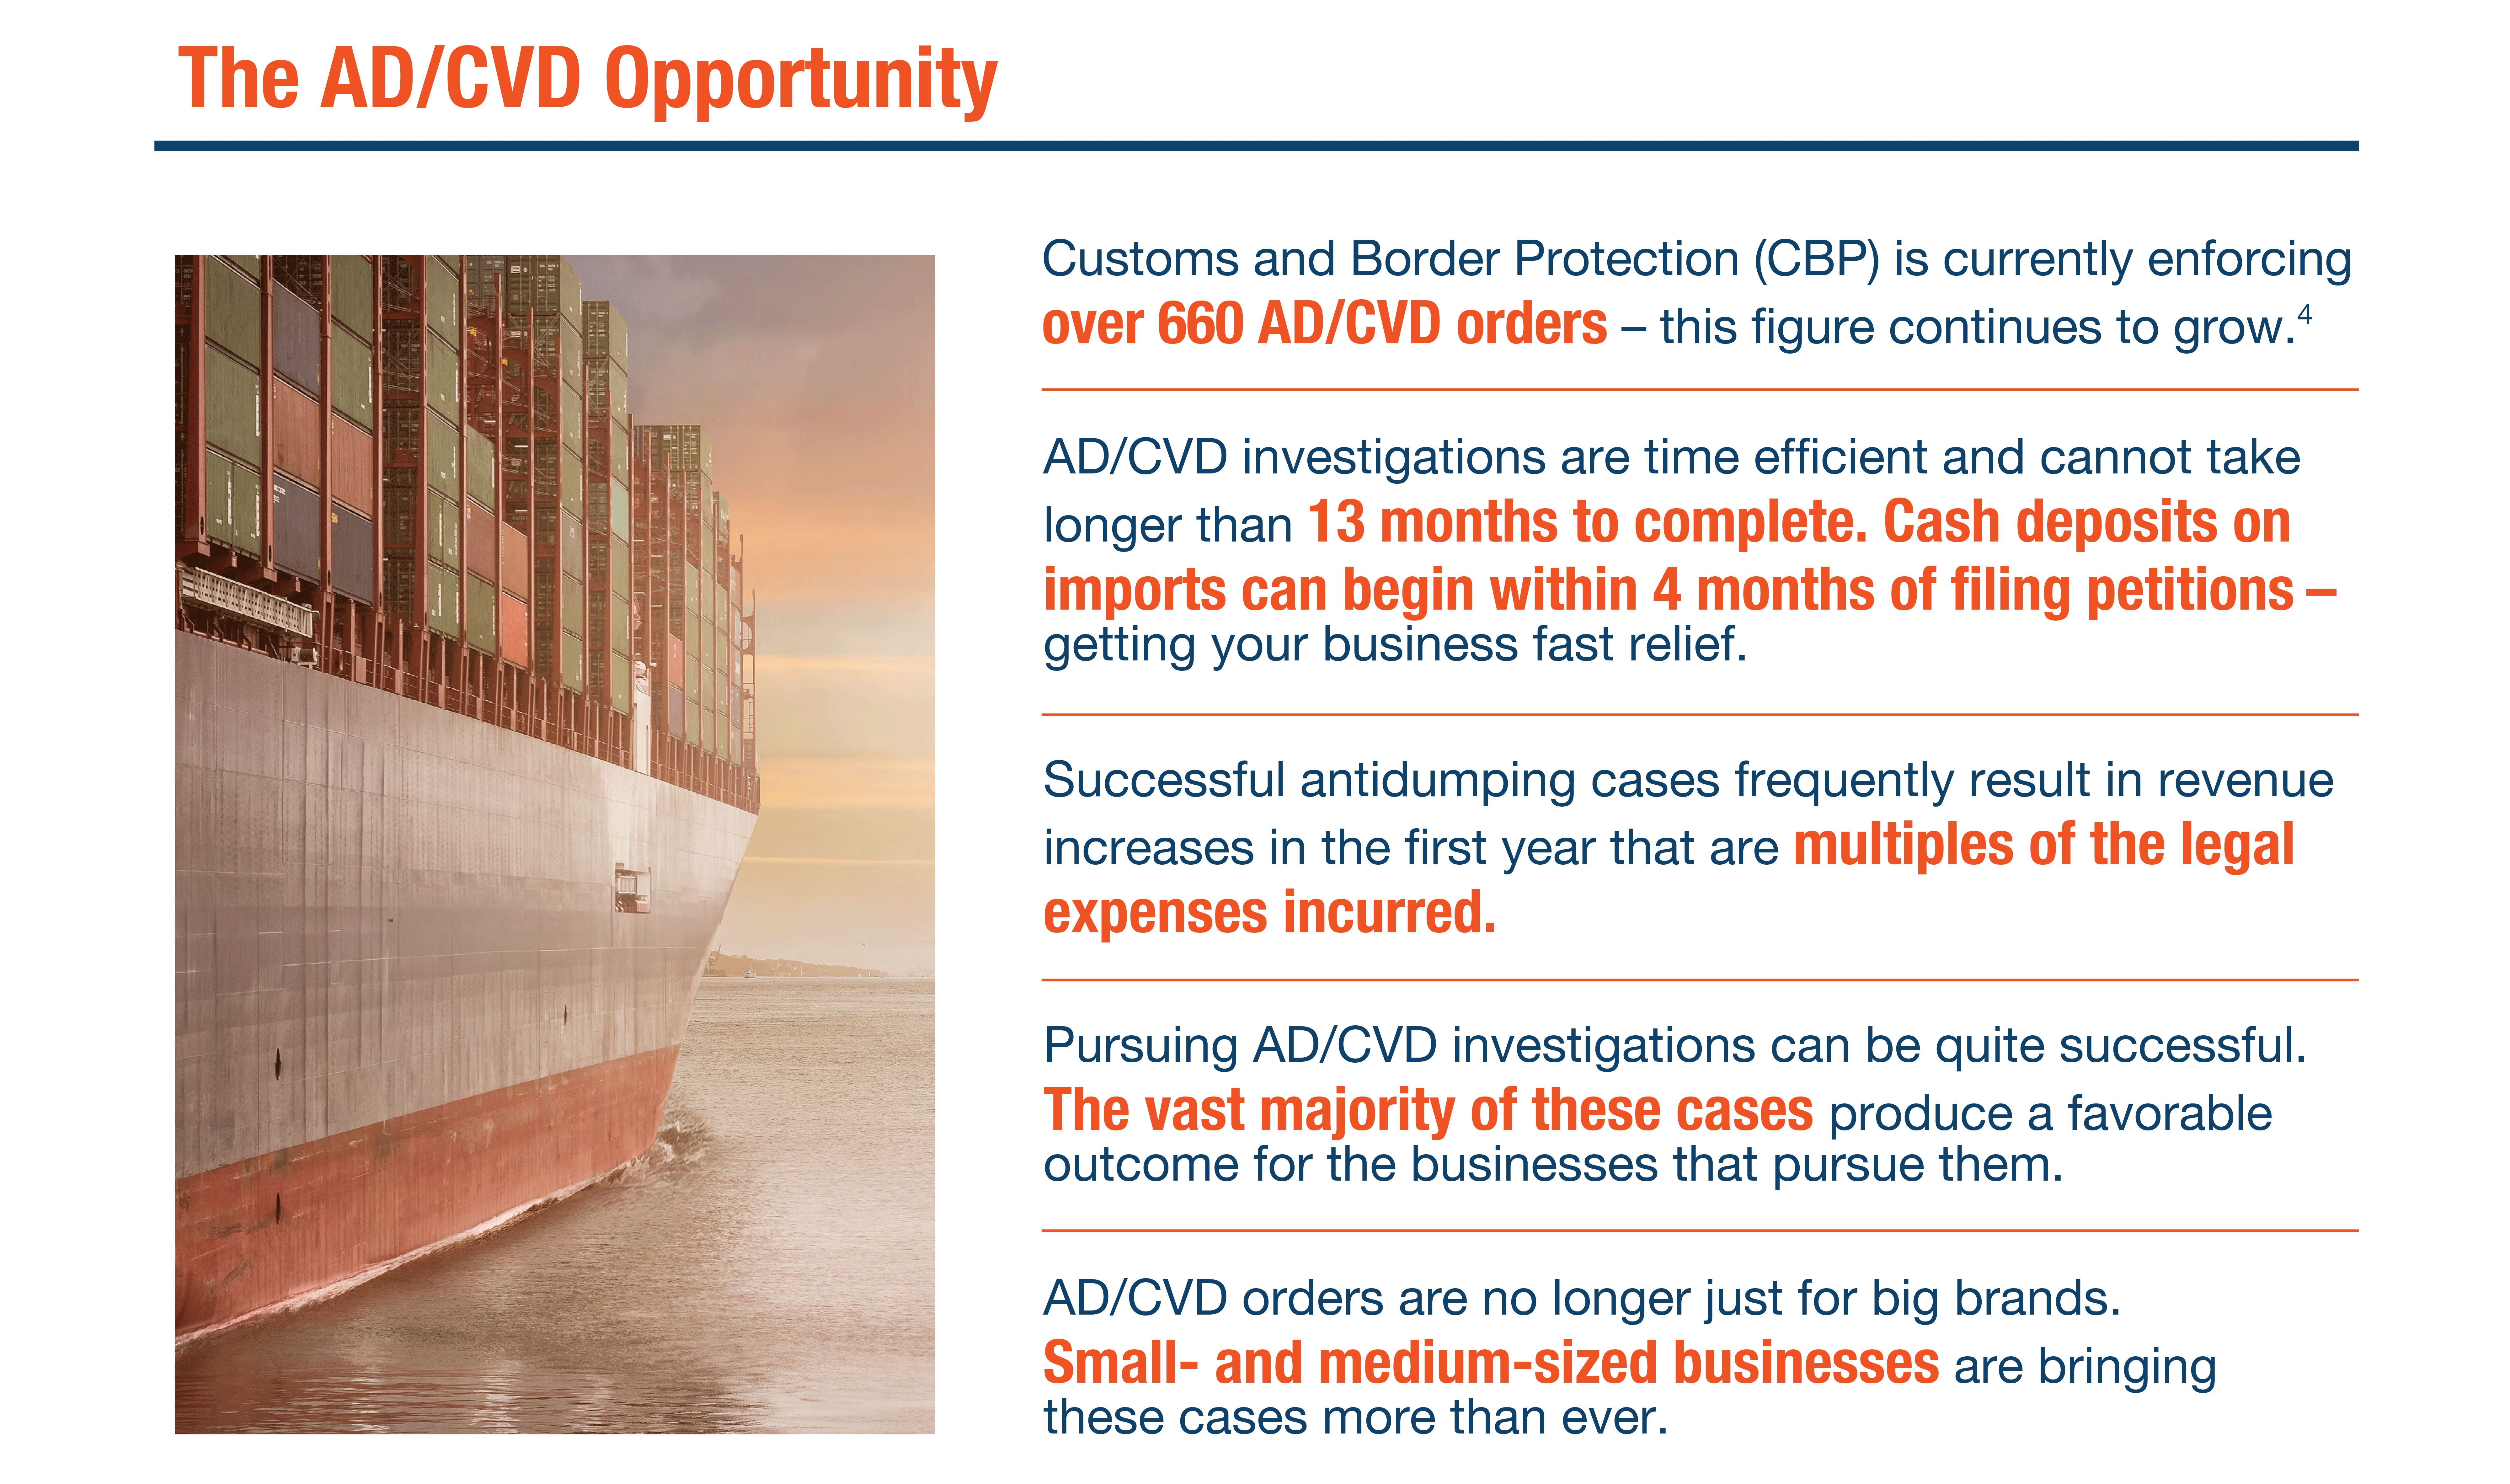 The AD/CVD Opportunity

Customs and Border Protection (CBP) is currently enforcing over 660 AD/CVD orders – this figure continues to grow.

AD/CVD investigations are time efficient and cannot take longer than 13 months to complete. Cash deposits on imports can begin within 4 months of filing petitions – getting your business fast relief.

Successful antidumping cases frequently result in revenue increases in the first year that are multiples of the legal expenses incurred.

Pursuing AD/CVD investigations can be quite successful. The vast majority of these cases produce a favorable outcome for the businesses that pursue them.